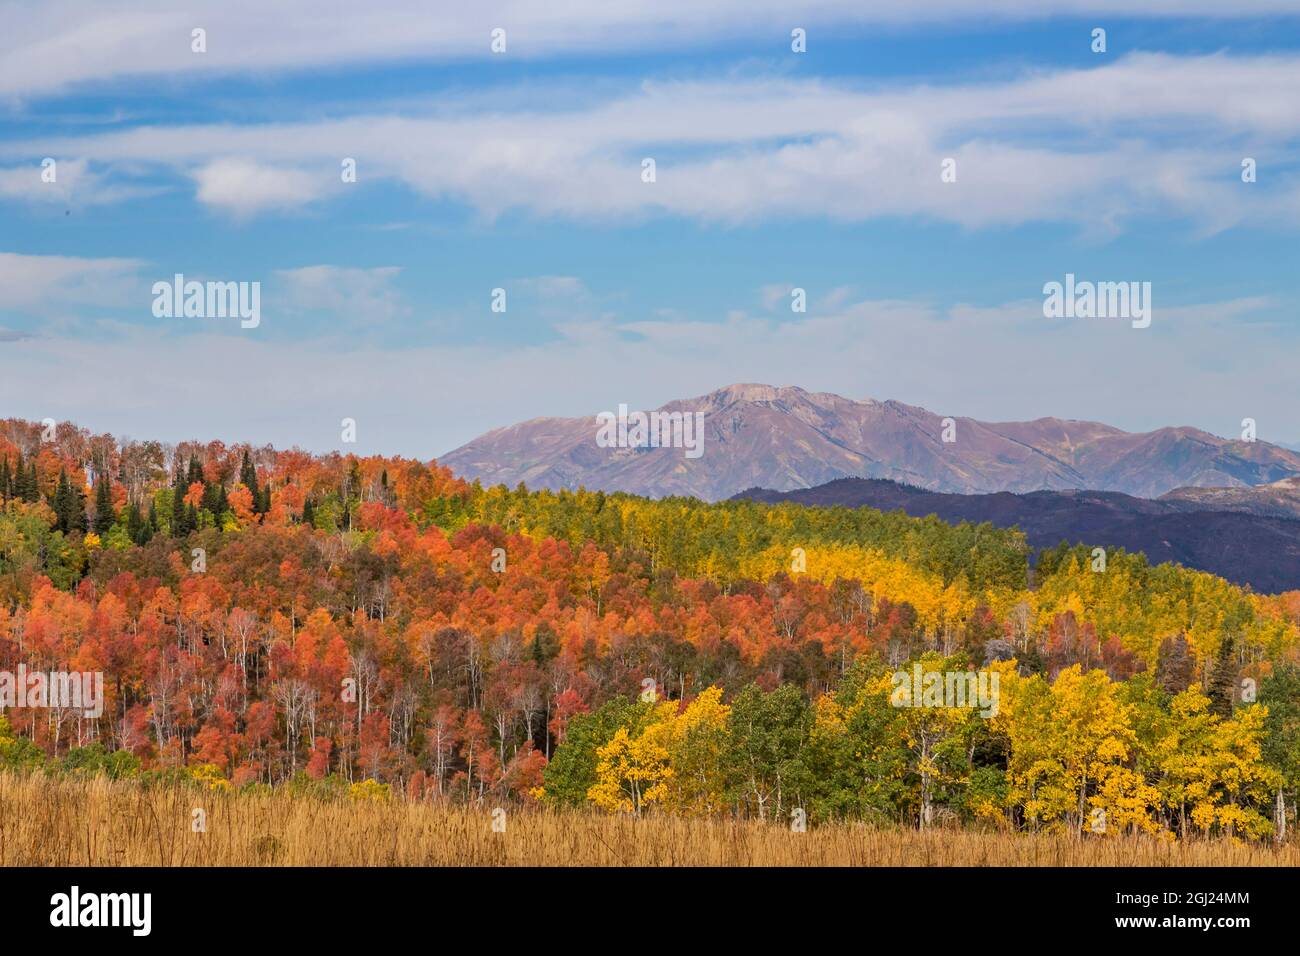 USA, Utah, Manti-La Sal National Forest. Mountain and forest landscape. Credit as: Don Paulson / Jaynes Gallery / DanitaDelimont.com Stock Photo